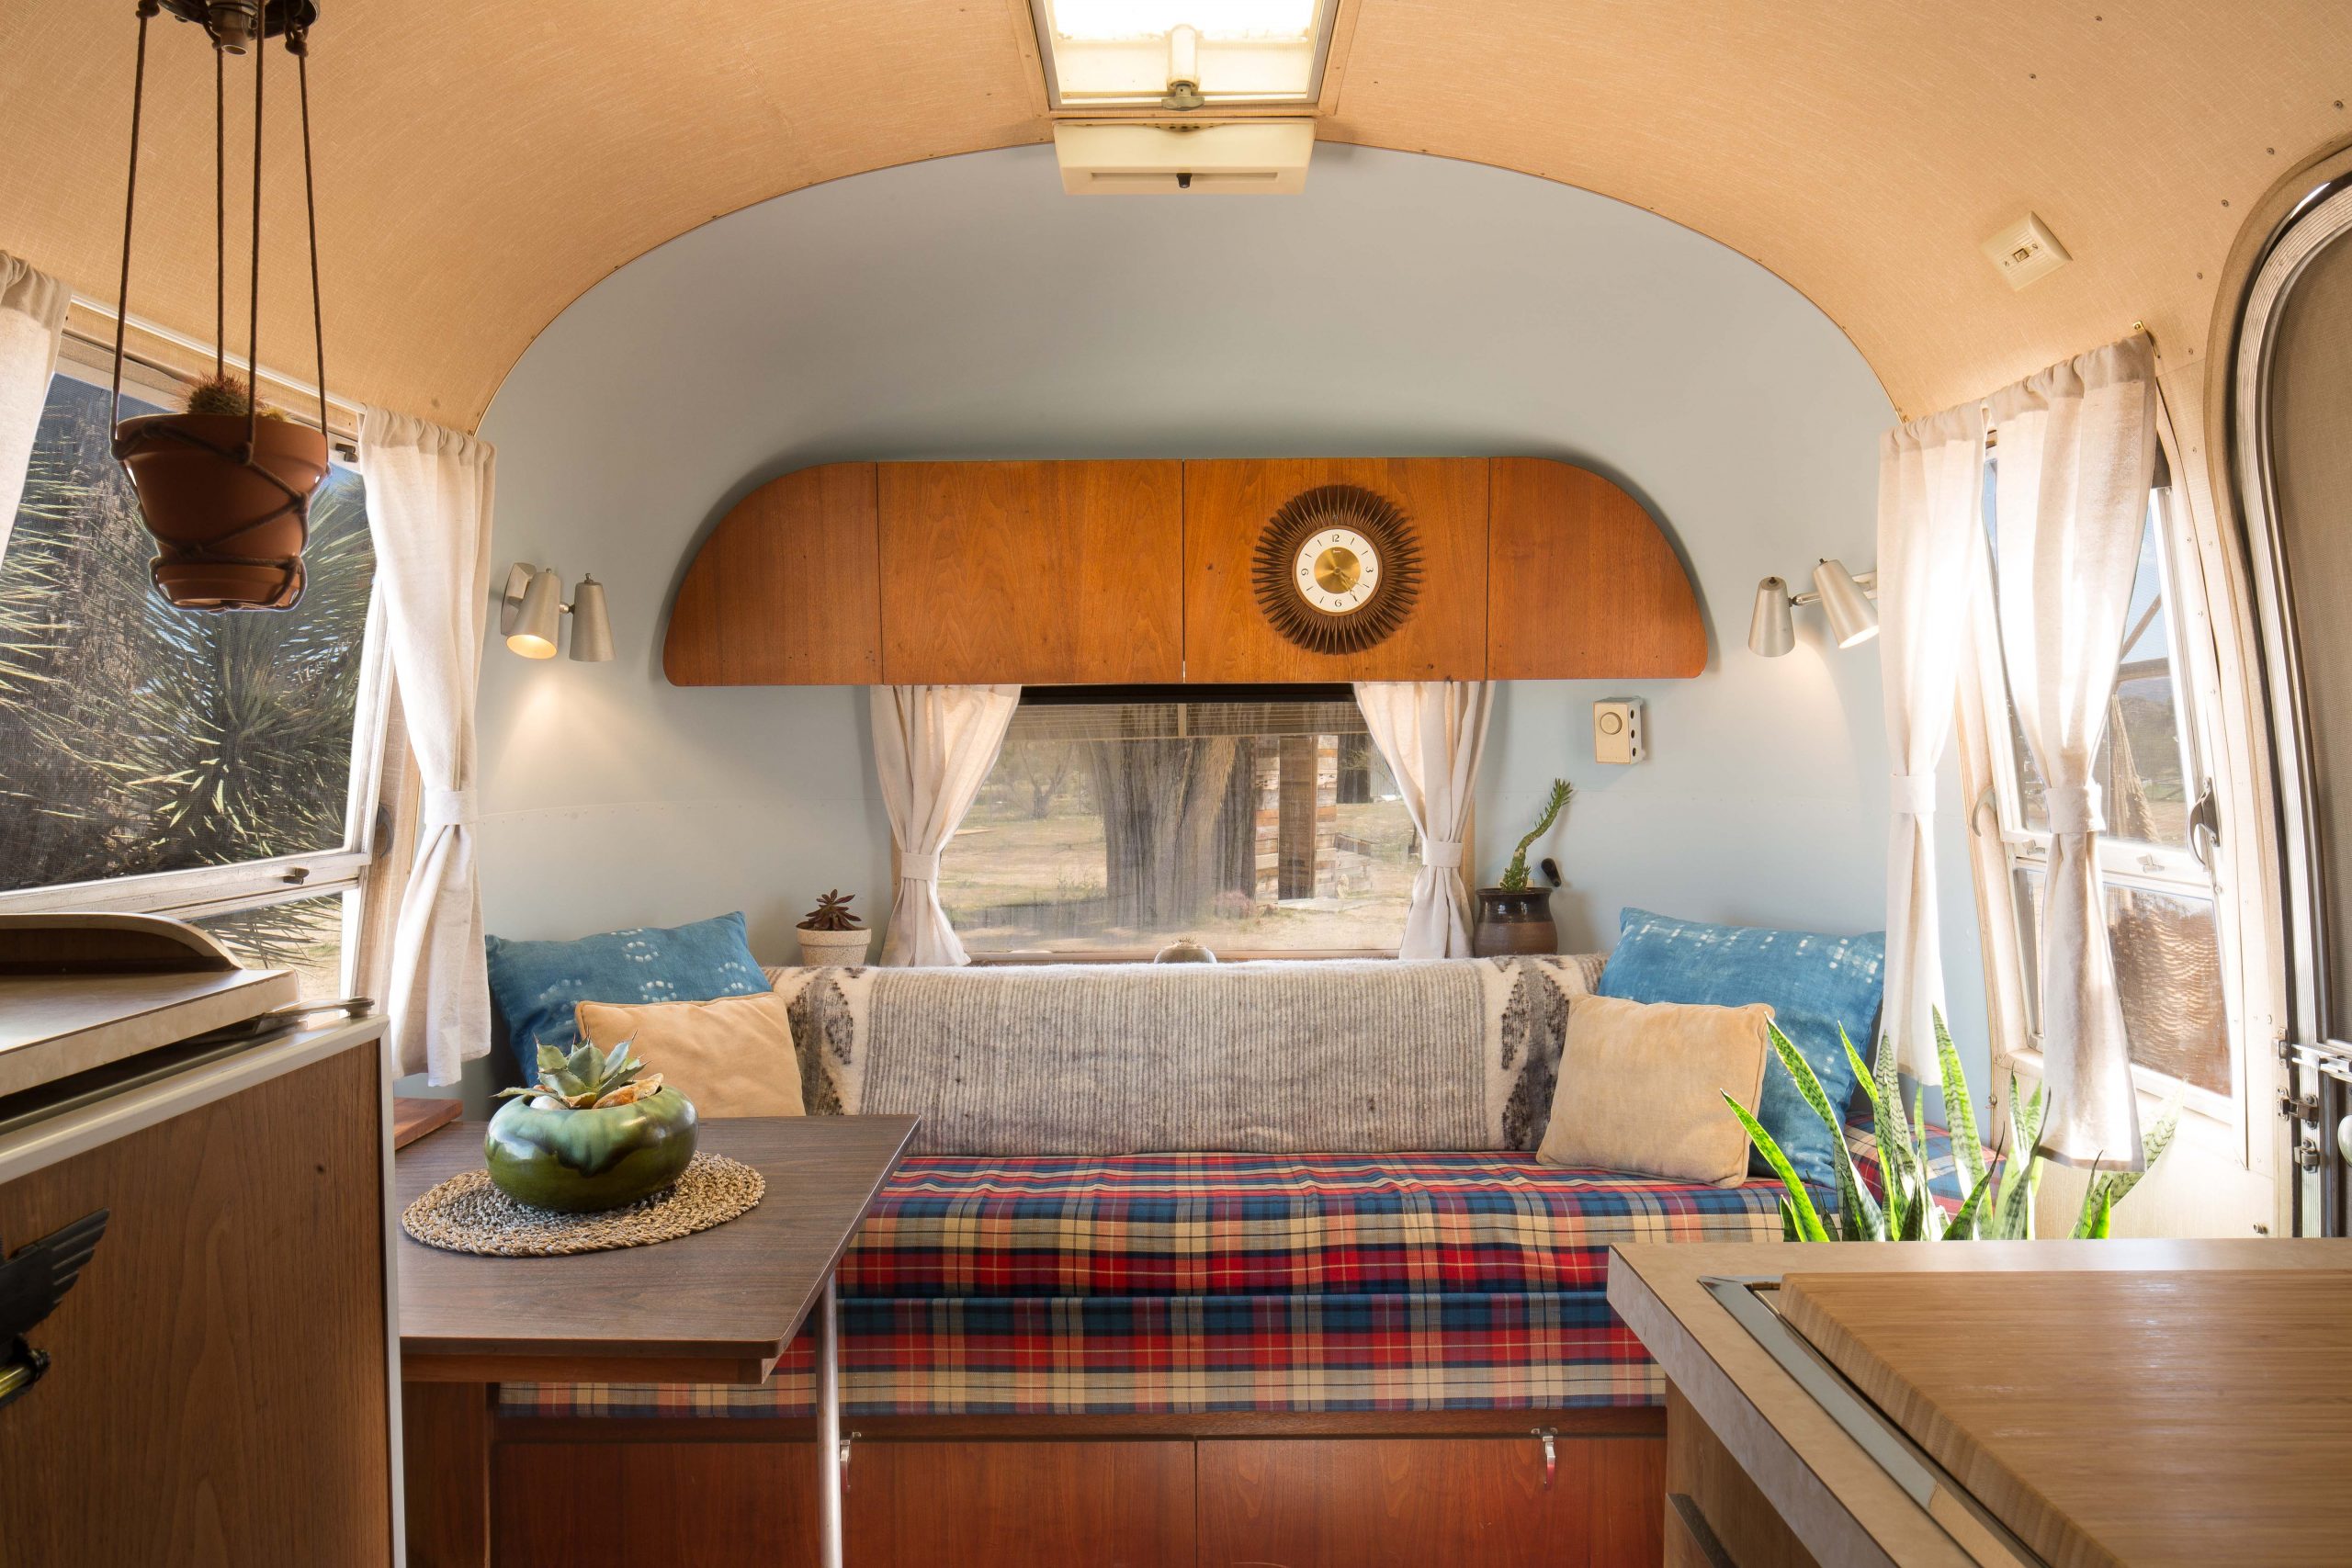 Revived Airstream in Joshua Tree, CA